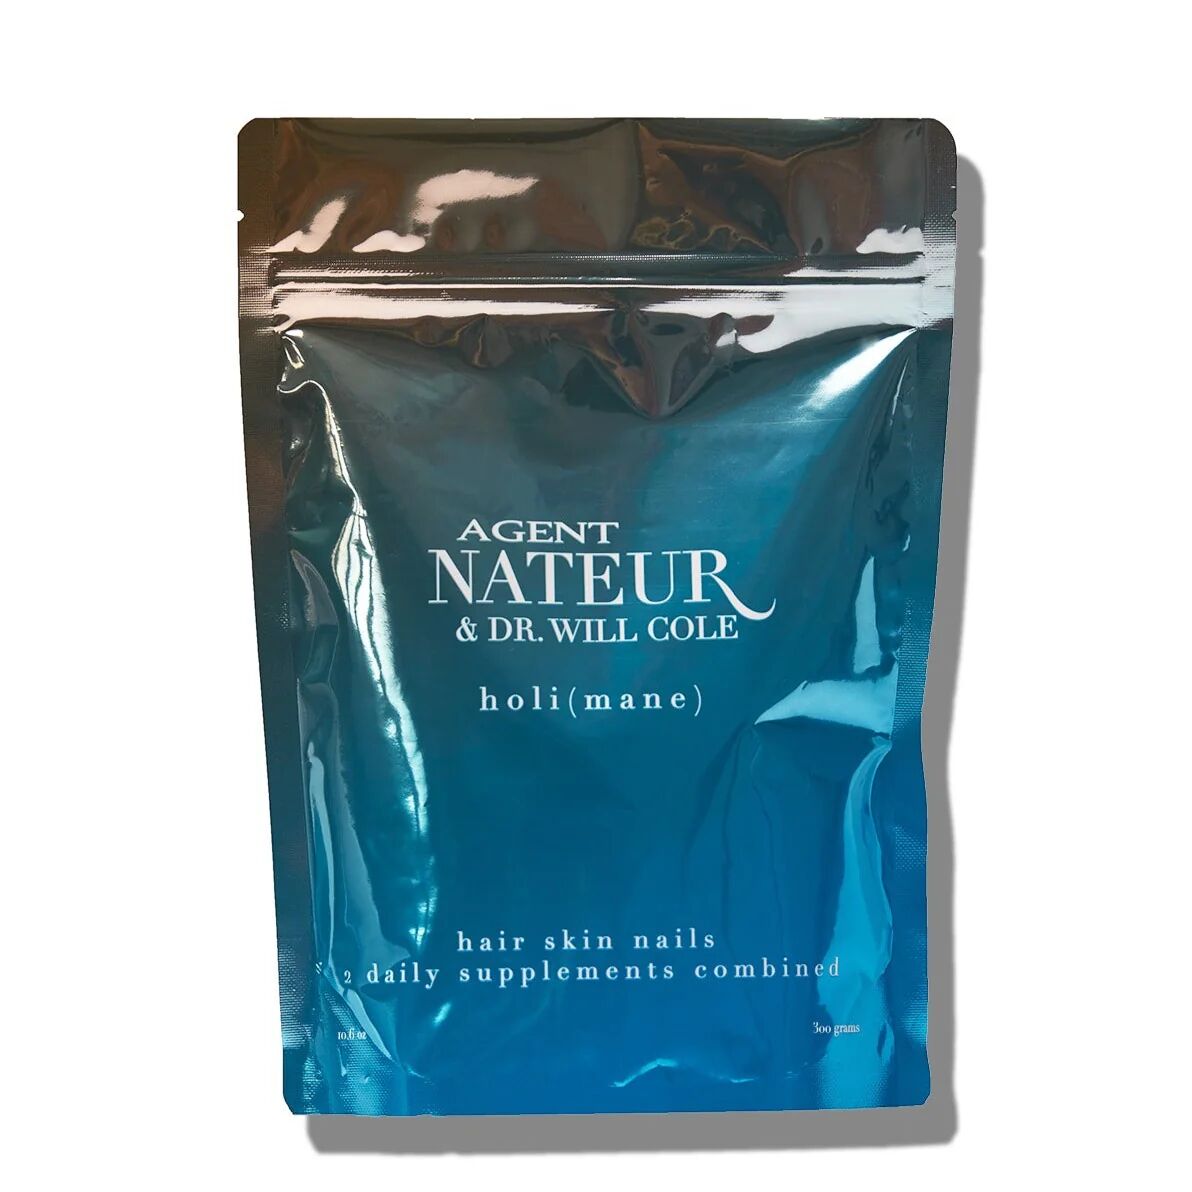 Agent Nateur Holi (Mane) Hair, Skin, Nails, 2 Daily Combined